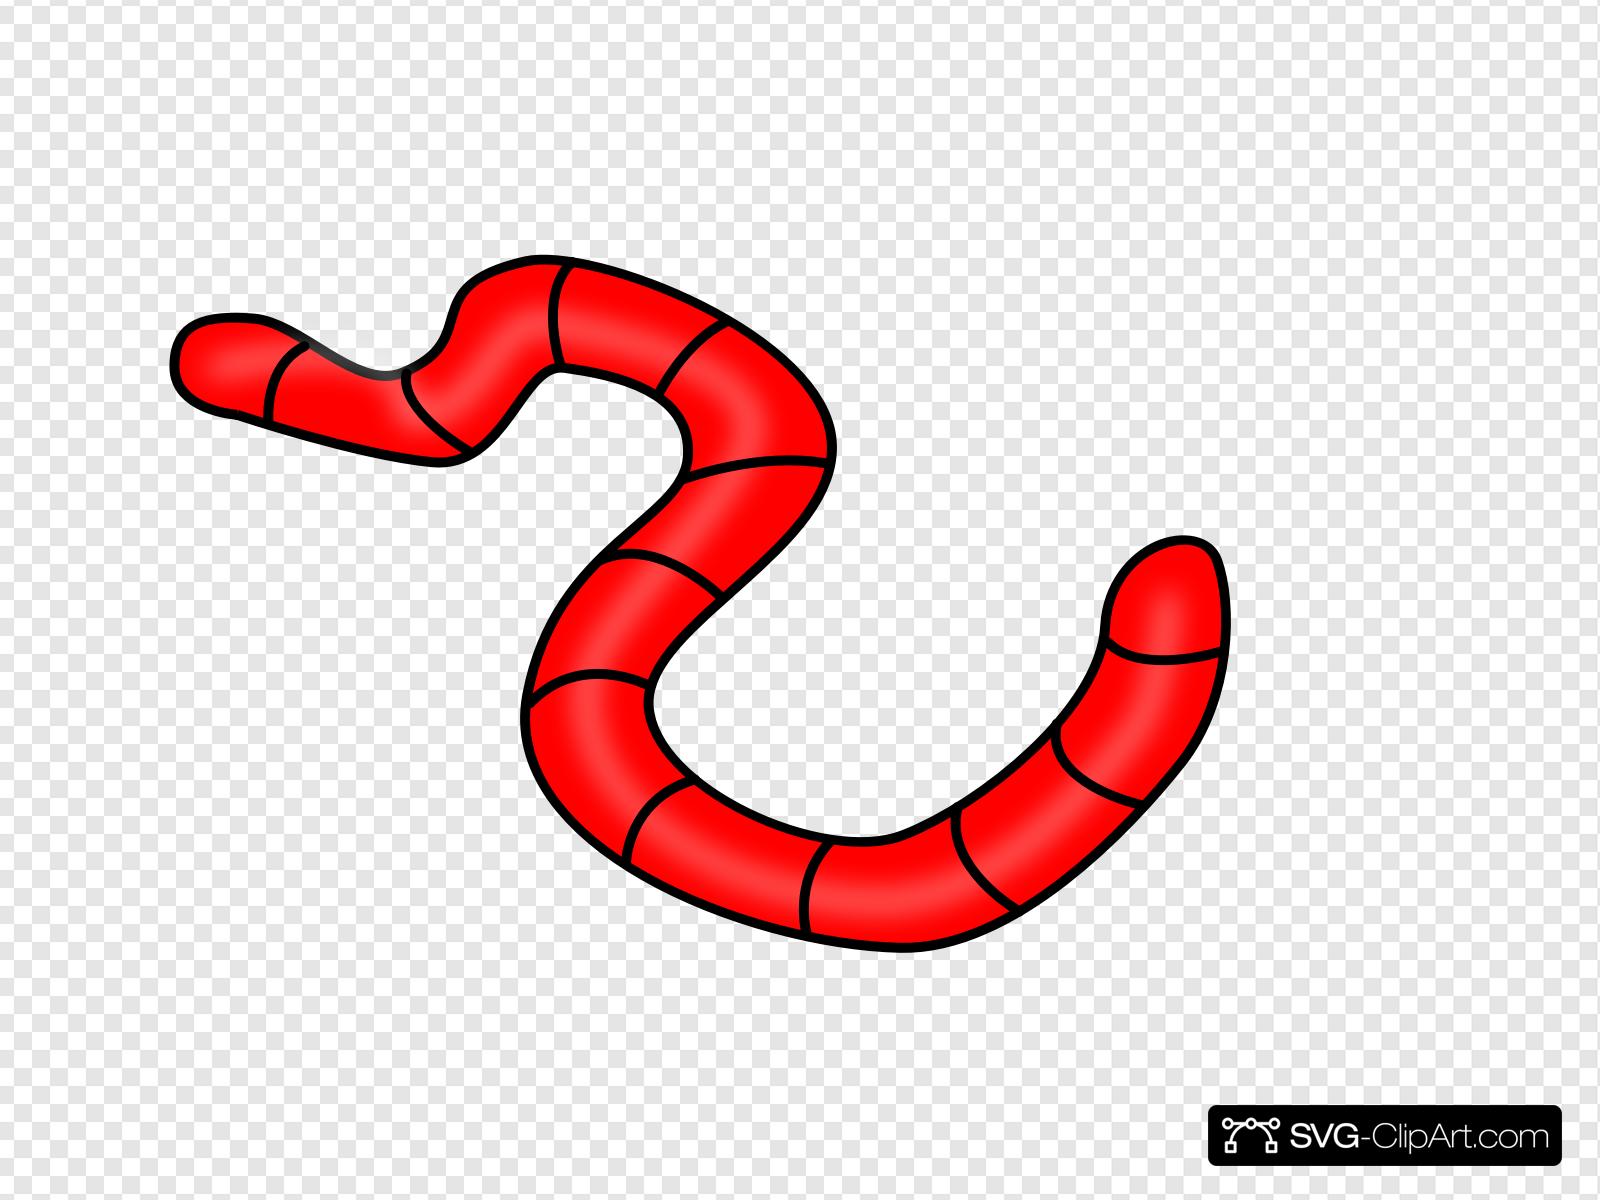 Worm clipart svg. Red earth clip art